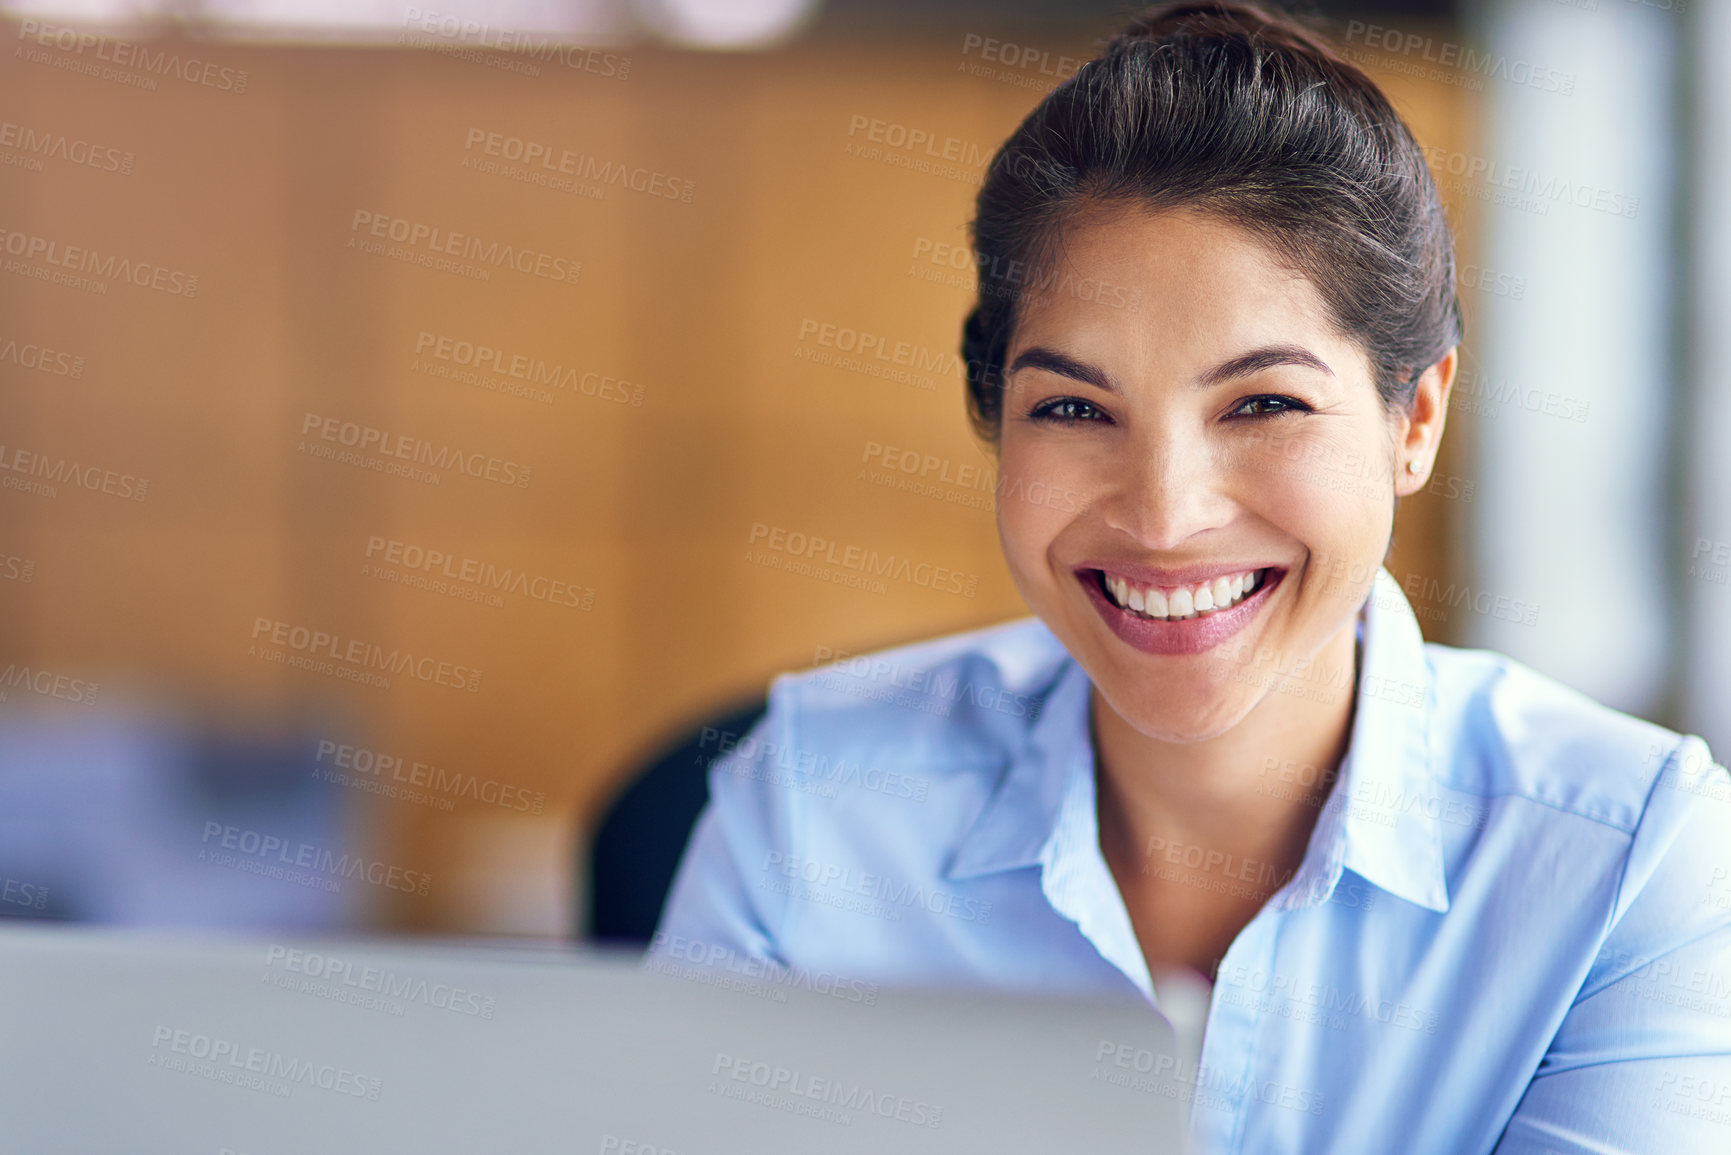 Buy stock photo Cropped portrait of a young businesswoman working on her laptop in the office